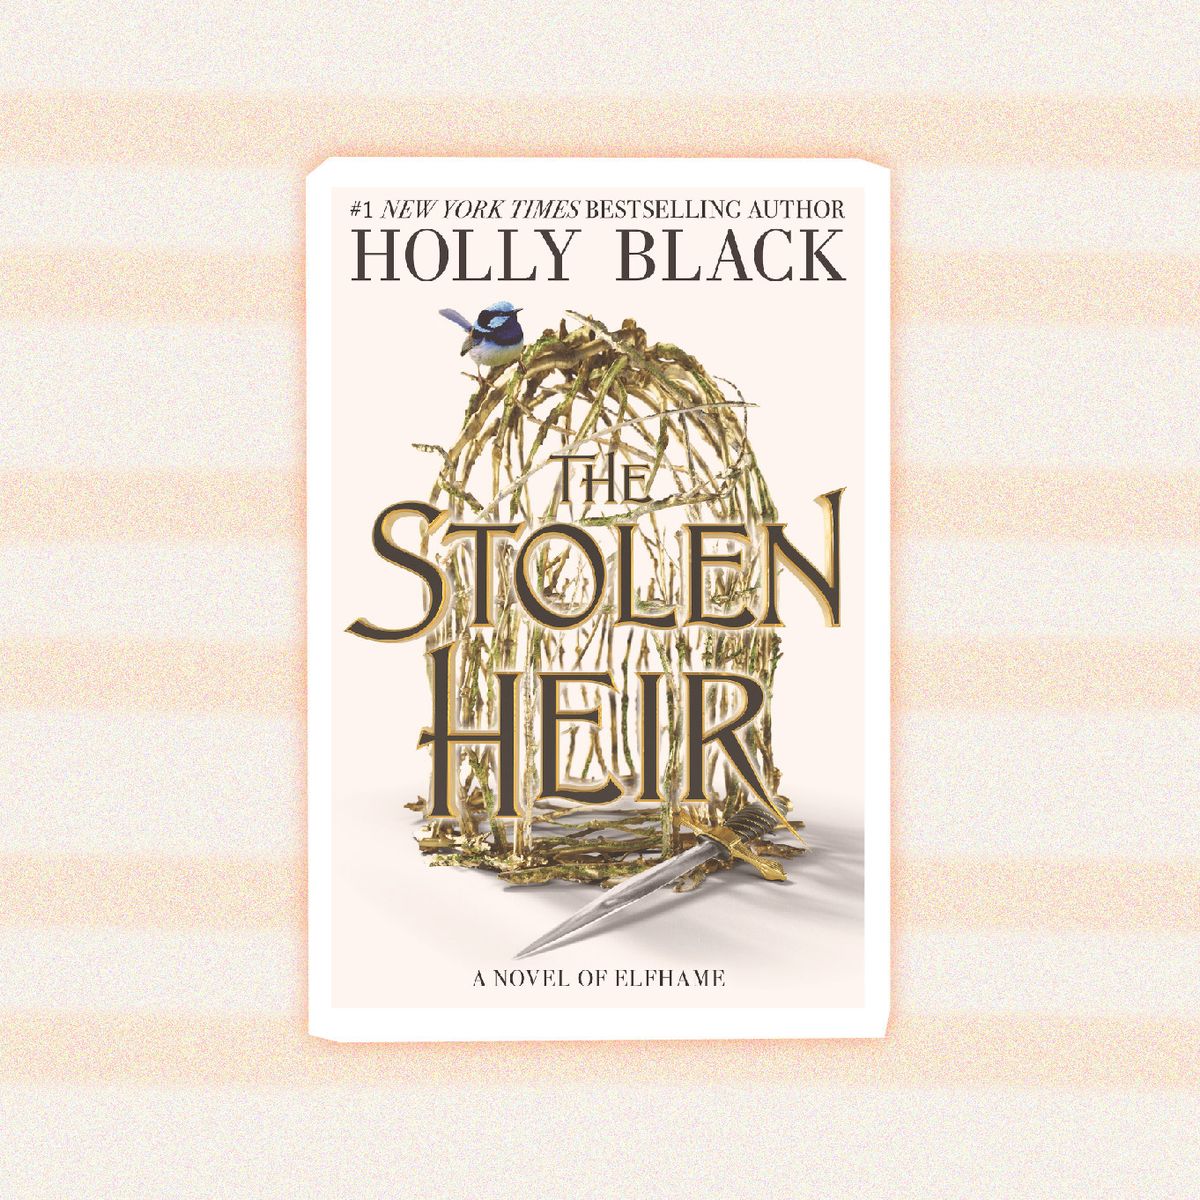 Holly Black Shares an Excerpt from New Duology Series, "The Stolen Heir"